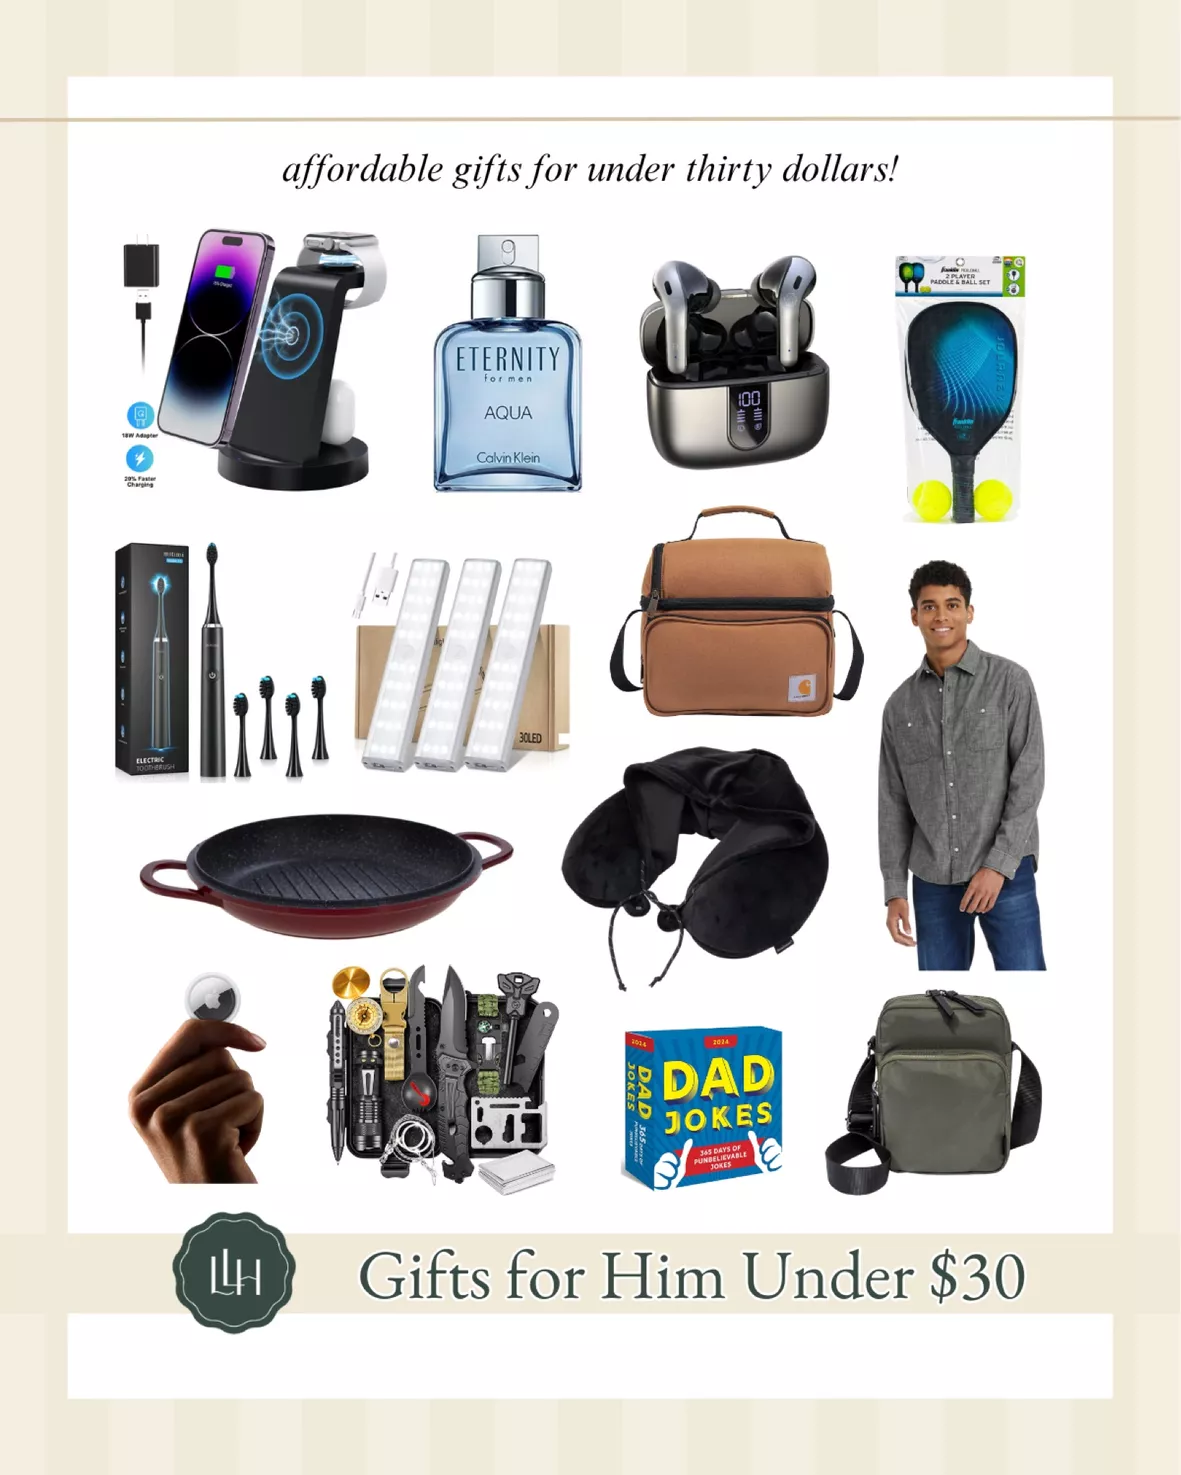 2014 Gift Guide: Gifts for Him